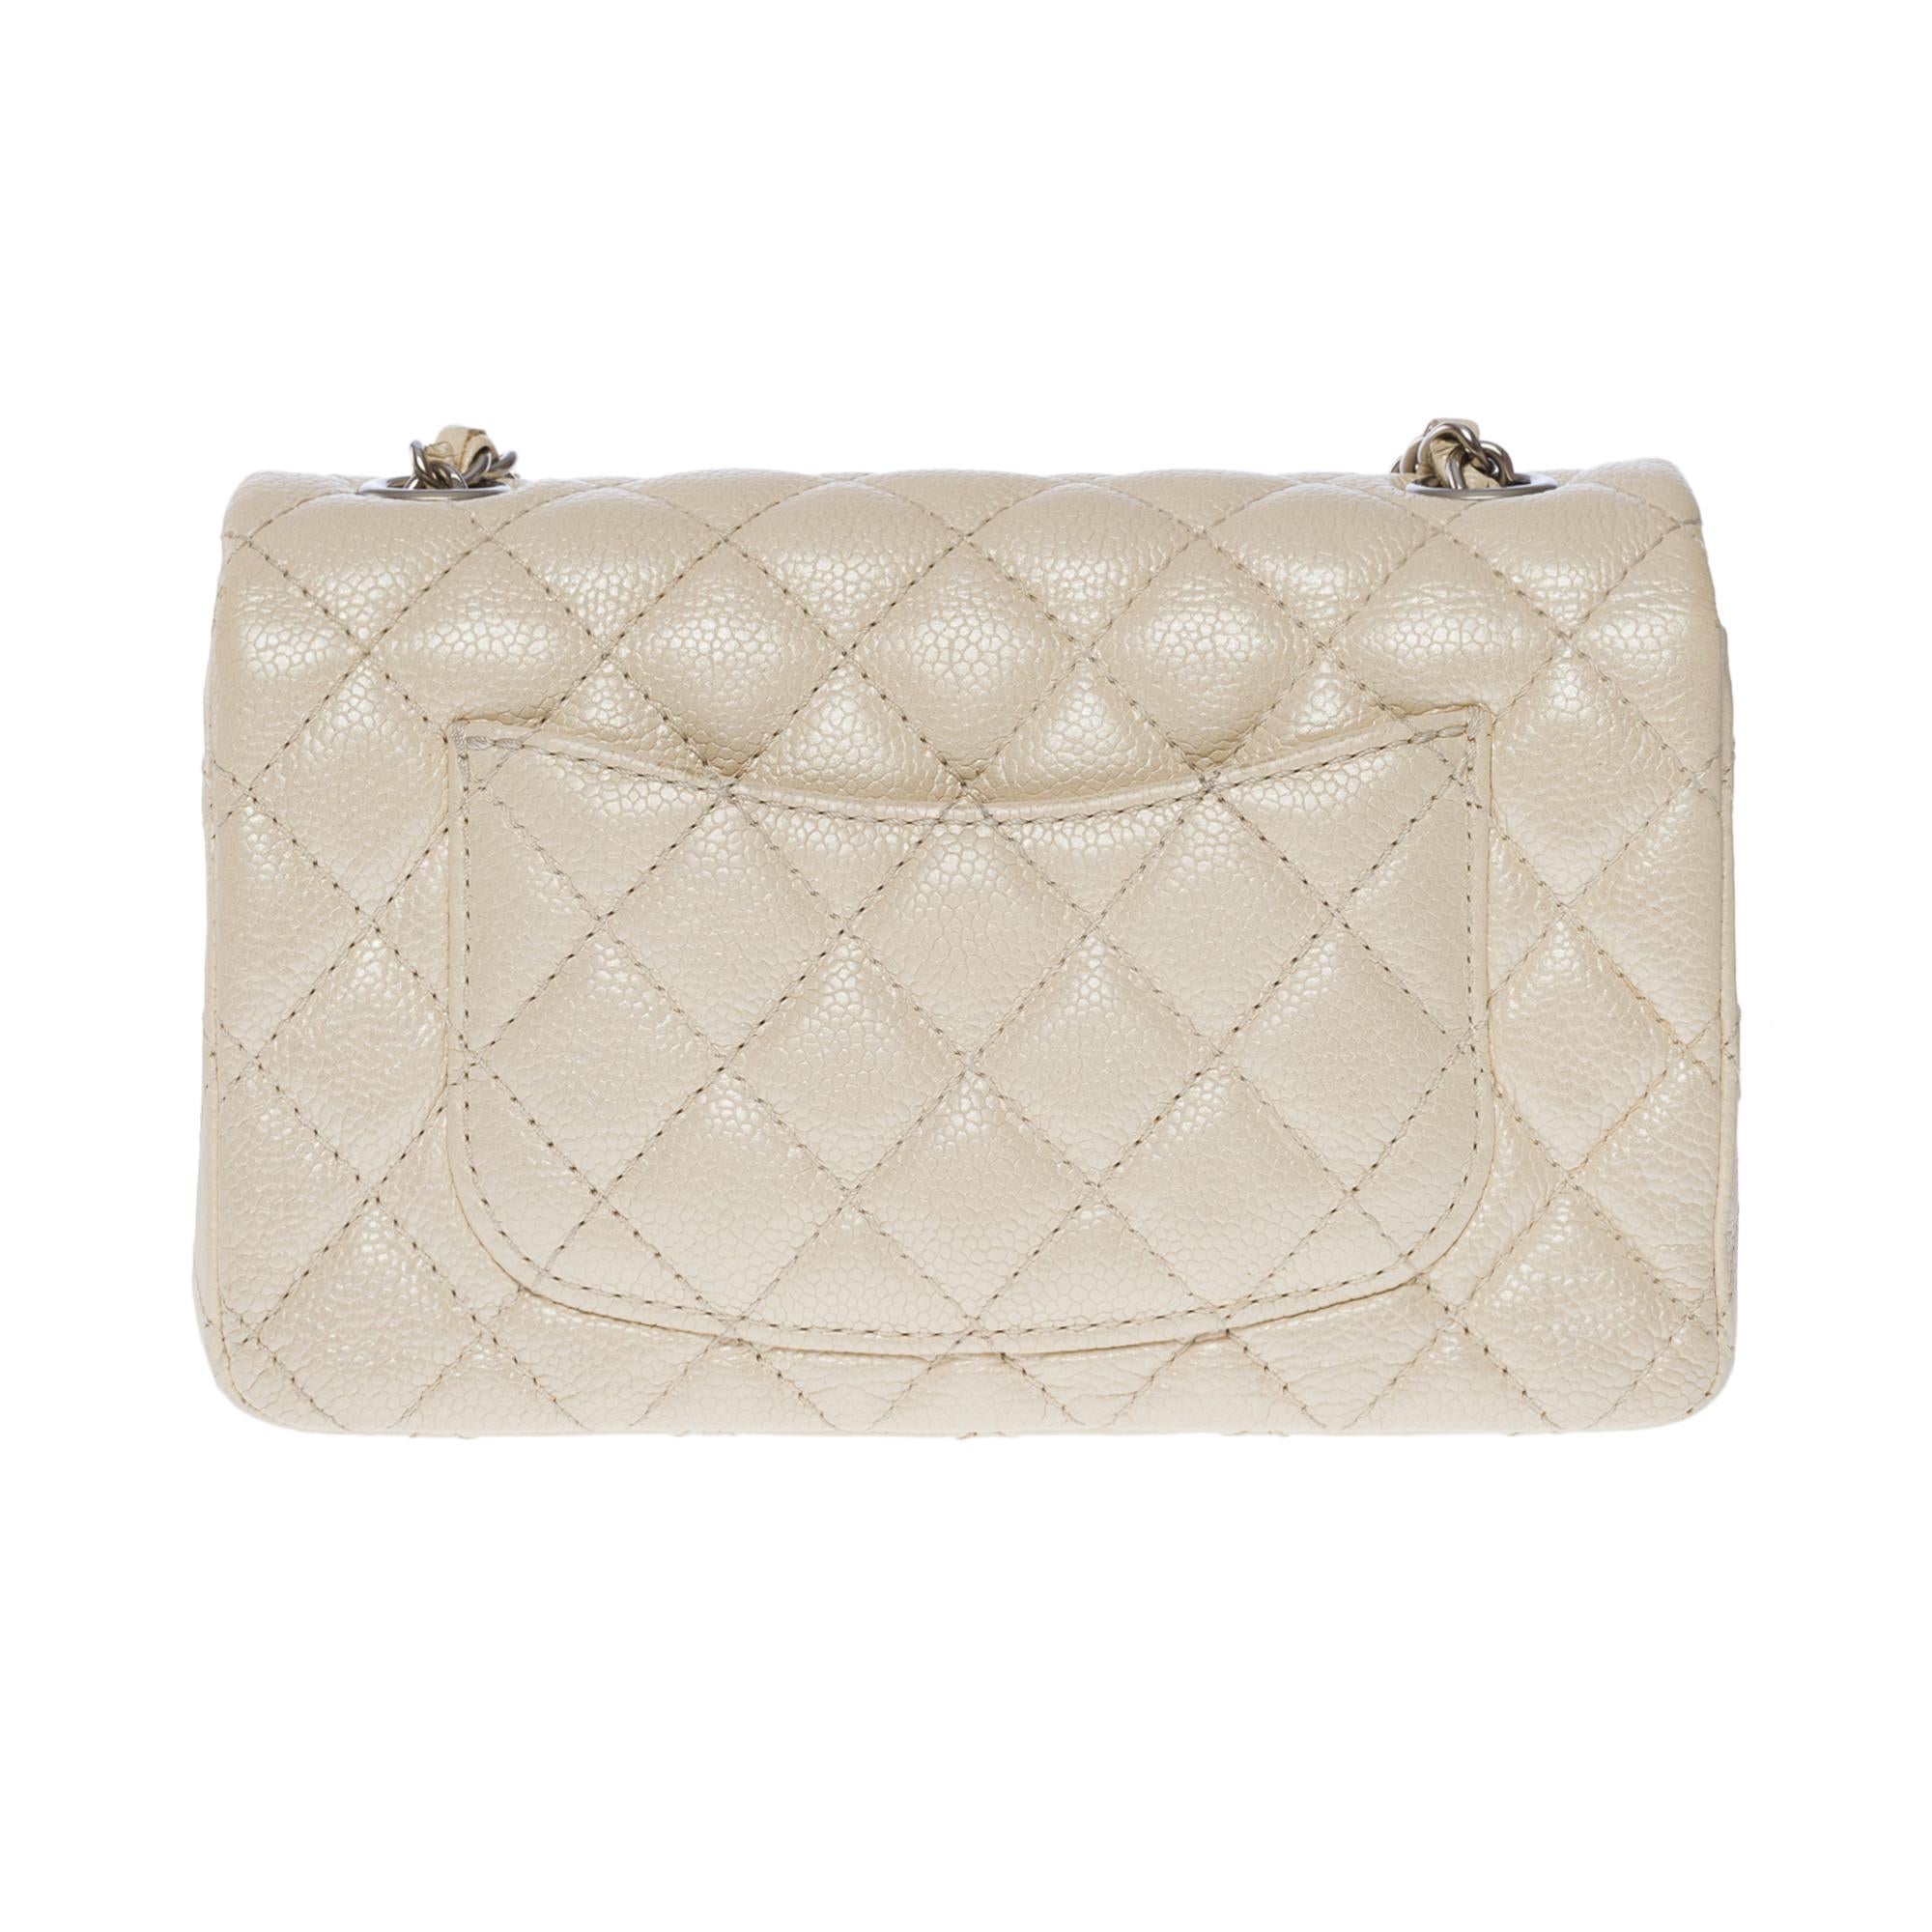 Splendid Chanel Timeless Mini Flap bag in off white pearl quilted leather, SHW In Excellent Condition For Sale In Paris, IDF